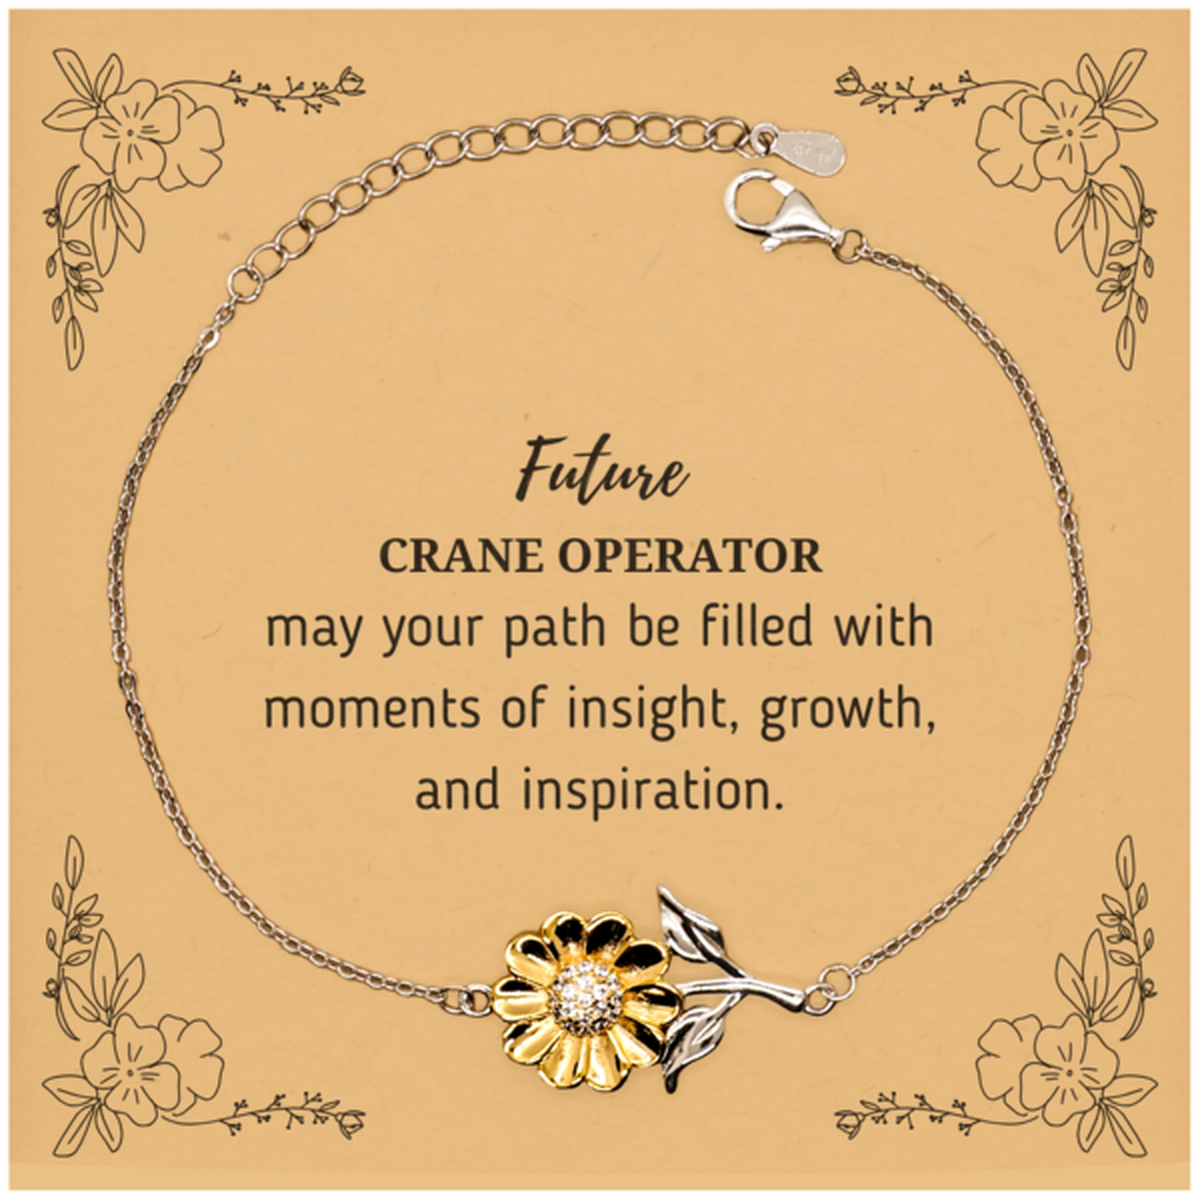 Future Crane Operator Gifts, May your path be filled with moments of insight, Graduation Gifts for New Crane Operator, Christmas Unique Sunflower Bracelet For Men, Women, Friends